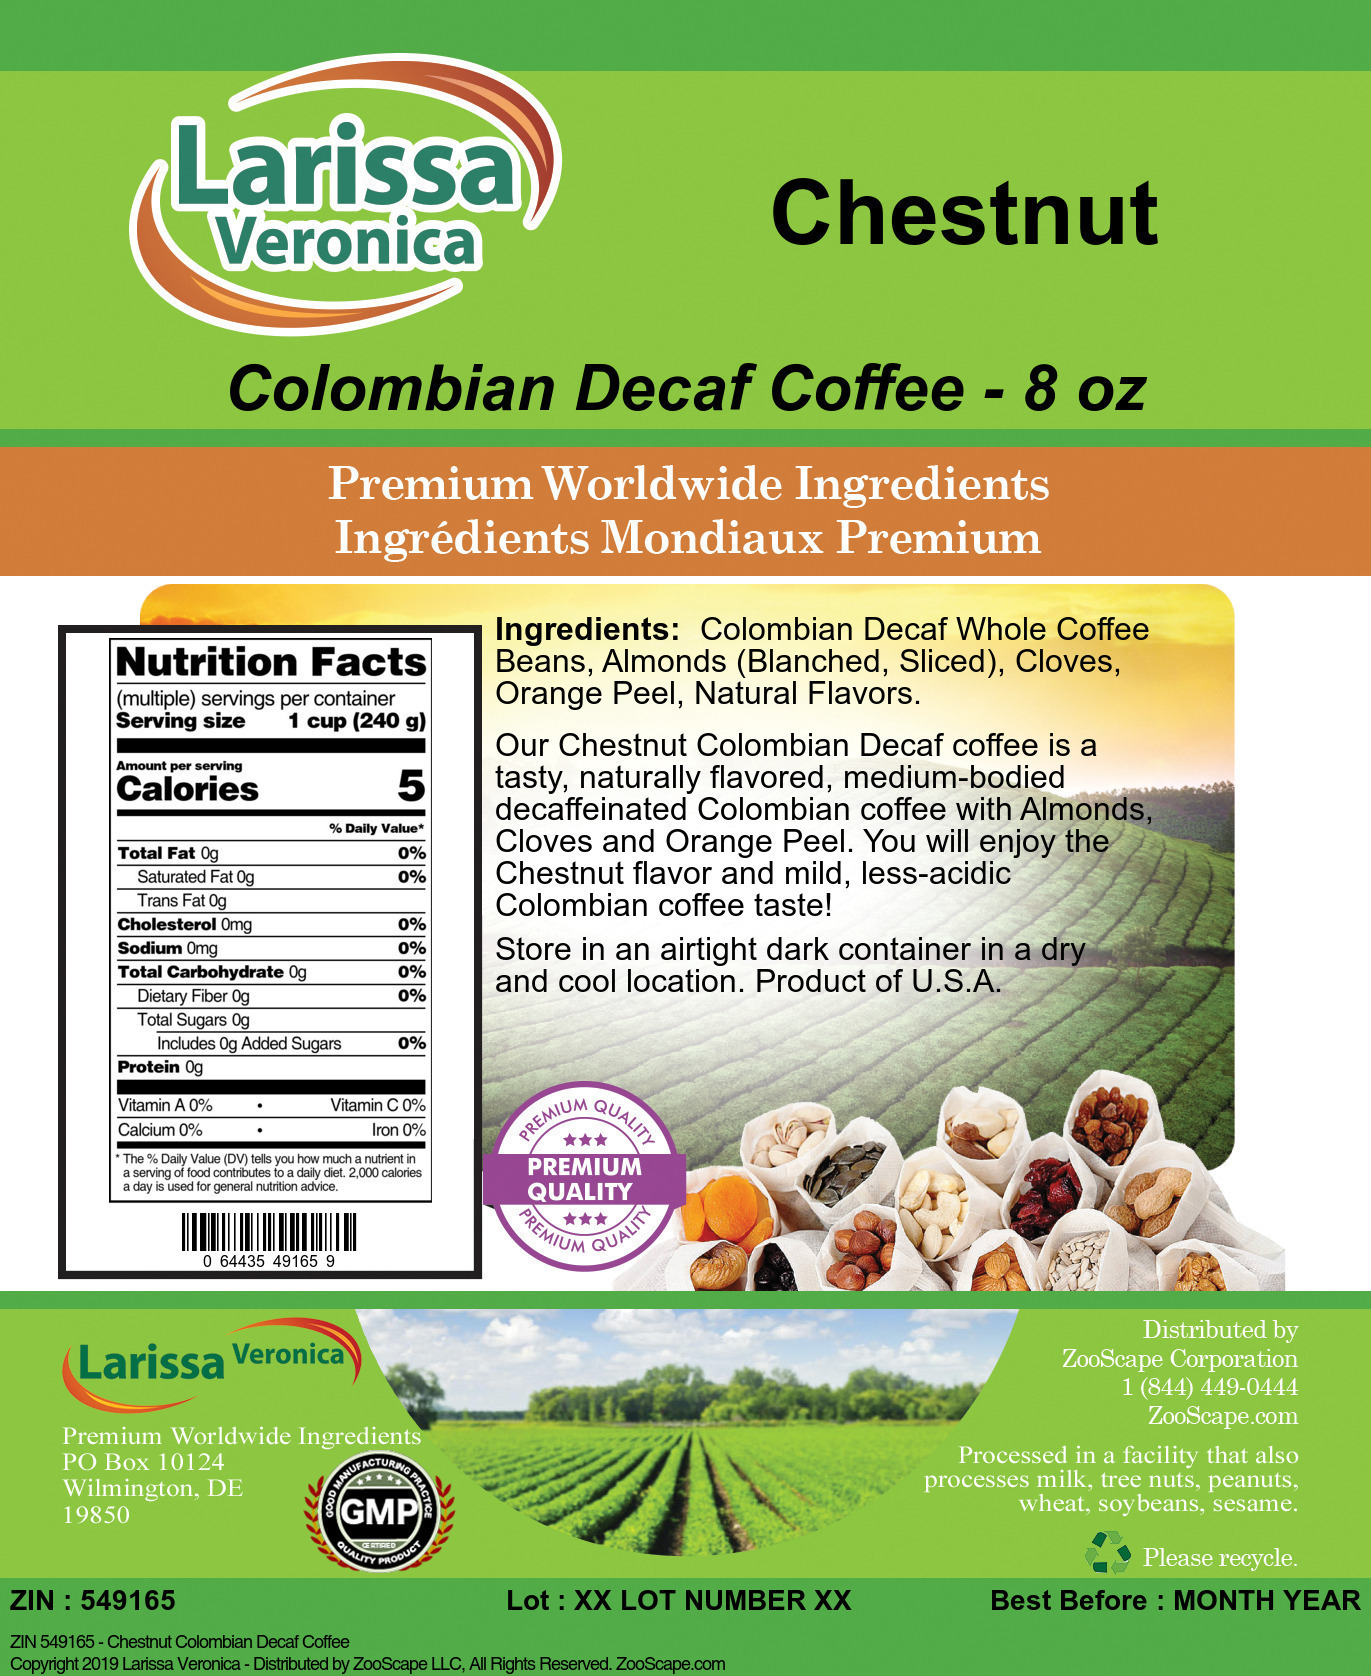 Chestnut Colombian Decaf Coffee - Label